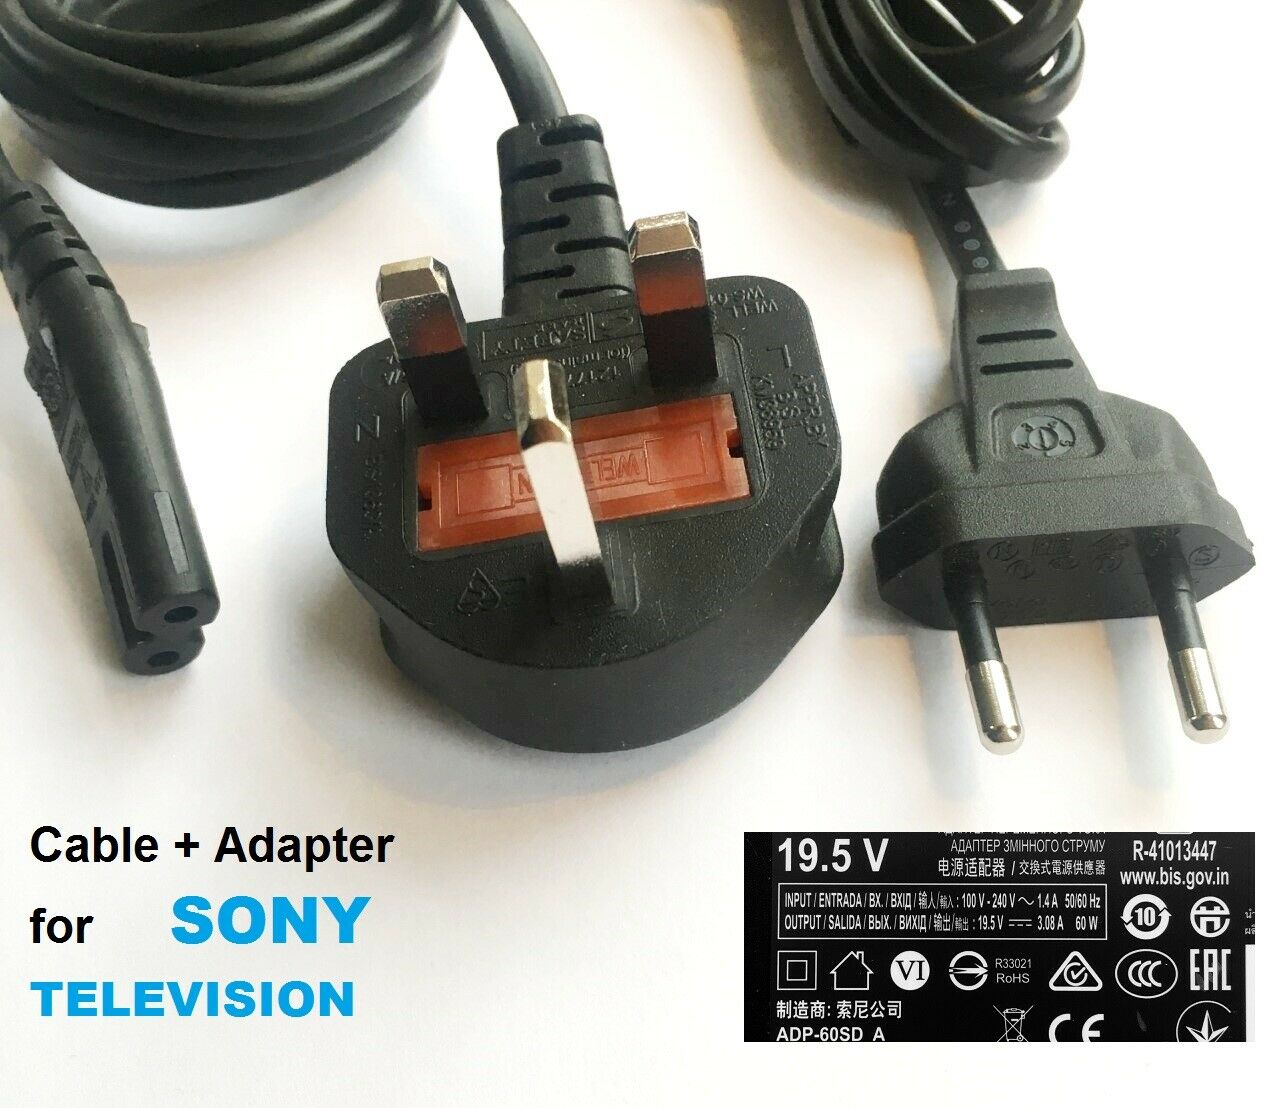 ACDP-060D01, 19.5V 3.08A 60W, FOR SONY TV 19.5V 3.08A 60W ACDP-060D01, , FOR SONY TV This power supply may also fit